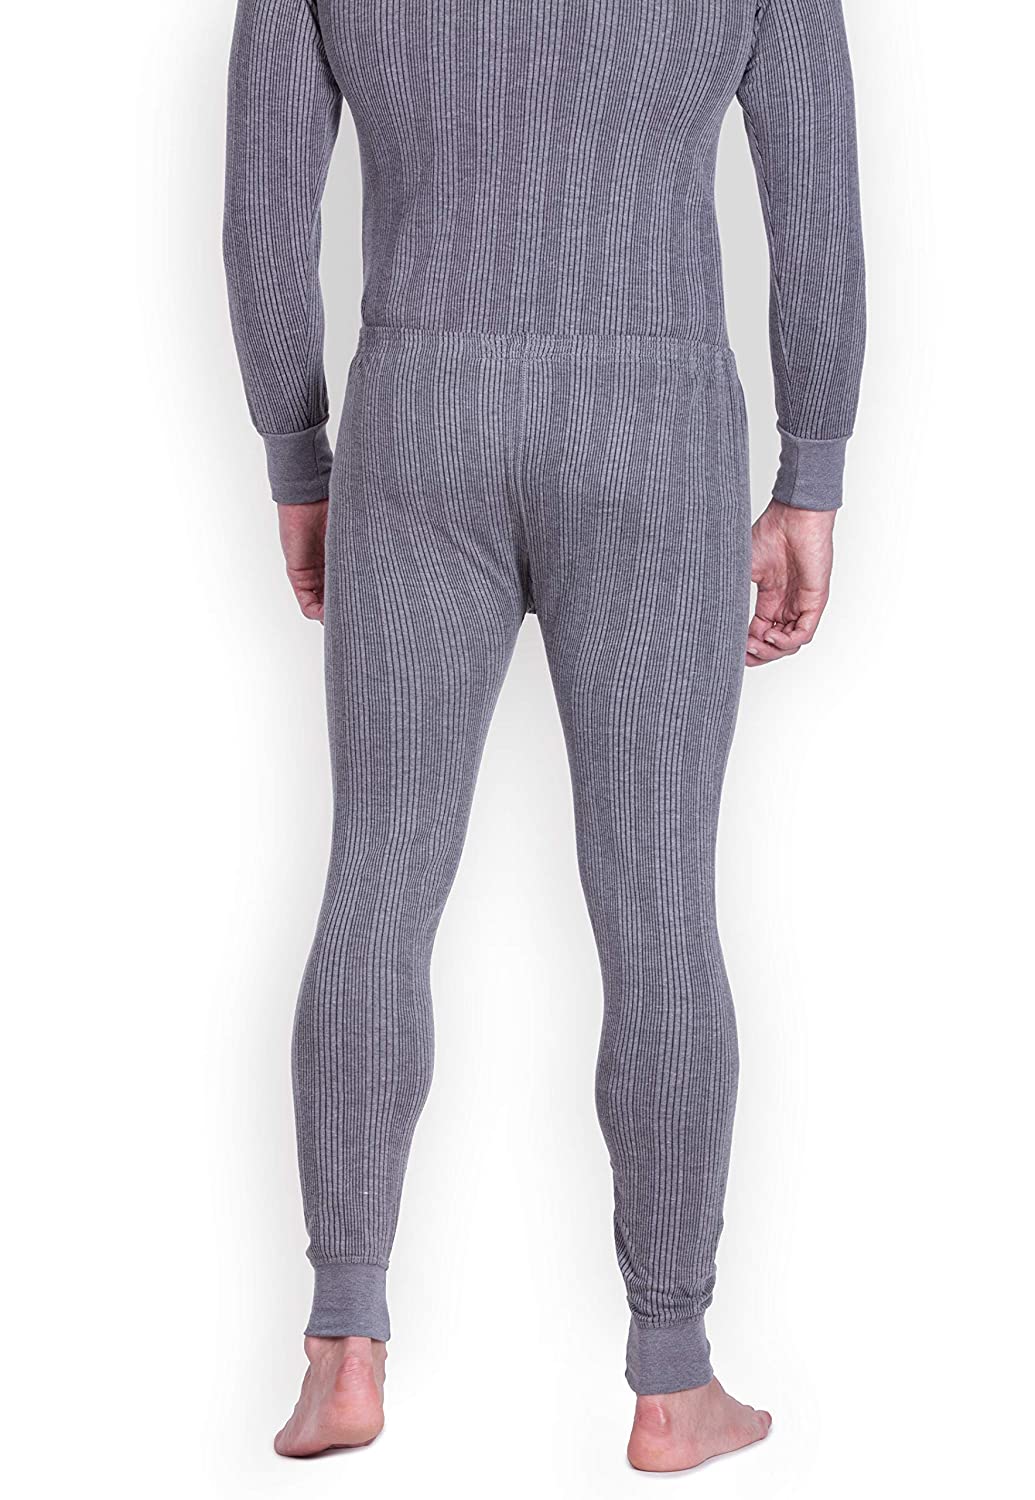 Buy MPI Winter Warm Lower Thermal Wear 1 PC Online @ ₹299 from ShopClues